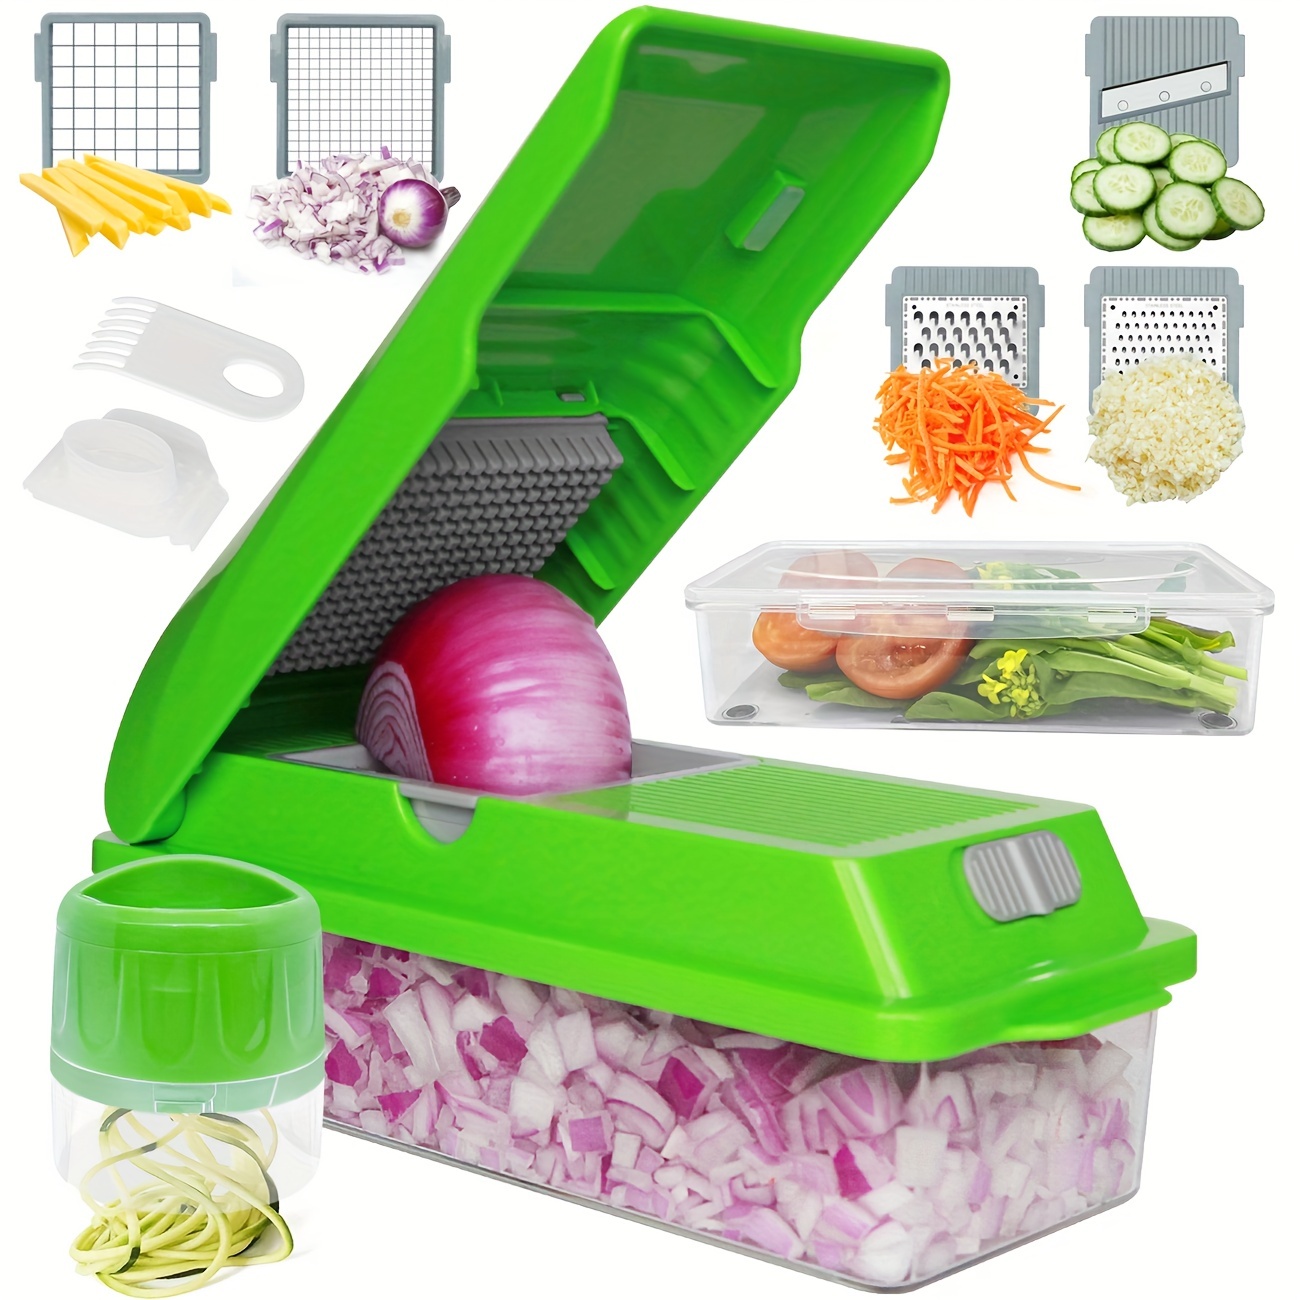 1 Set Vegetable Chopper, Pro Onion Chopper, Multifunctional 13 in 1 Food  Chopper, Kitchen Vegetable Slicer Dicer Cutter,Veggie Chopper With 8  Blades,Carrot and Garlic Chopper With Container